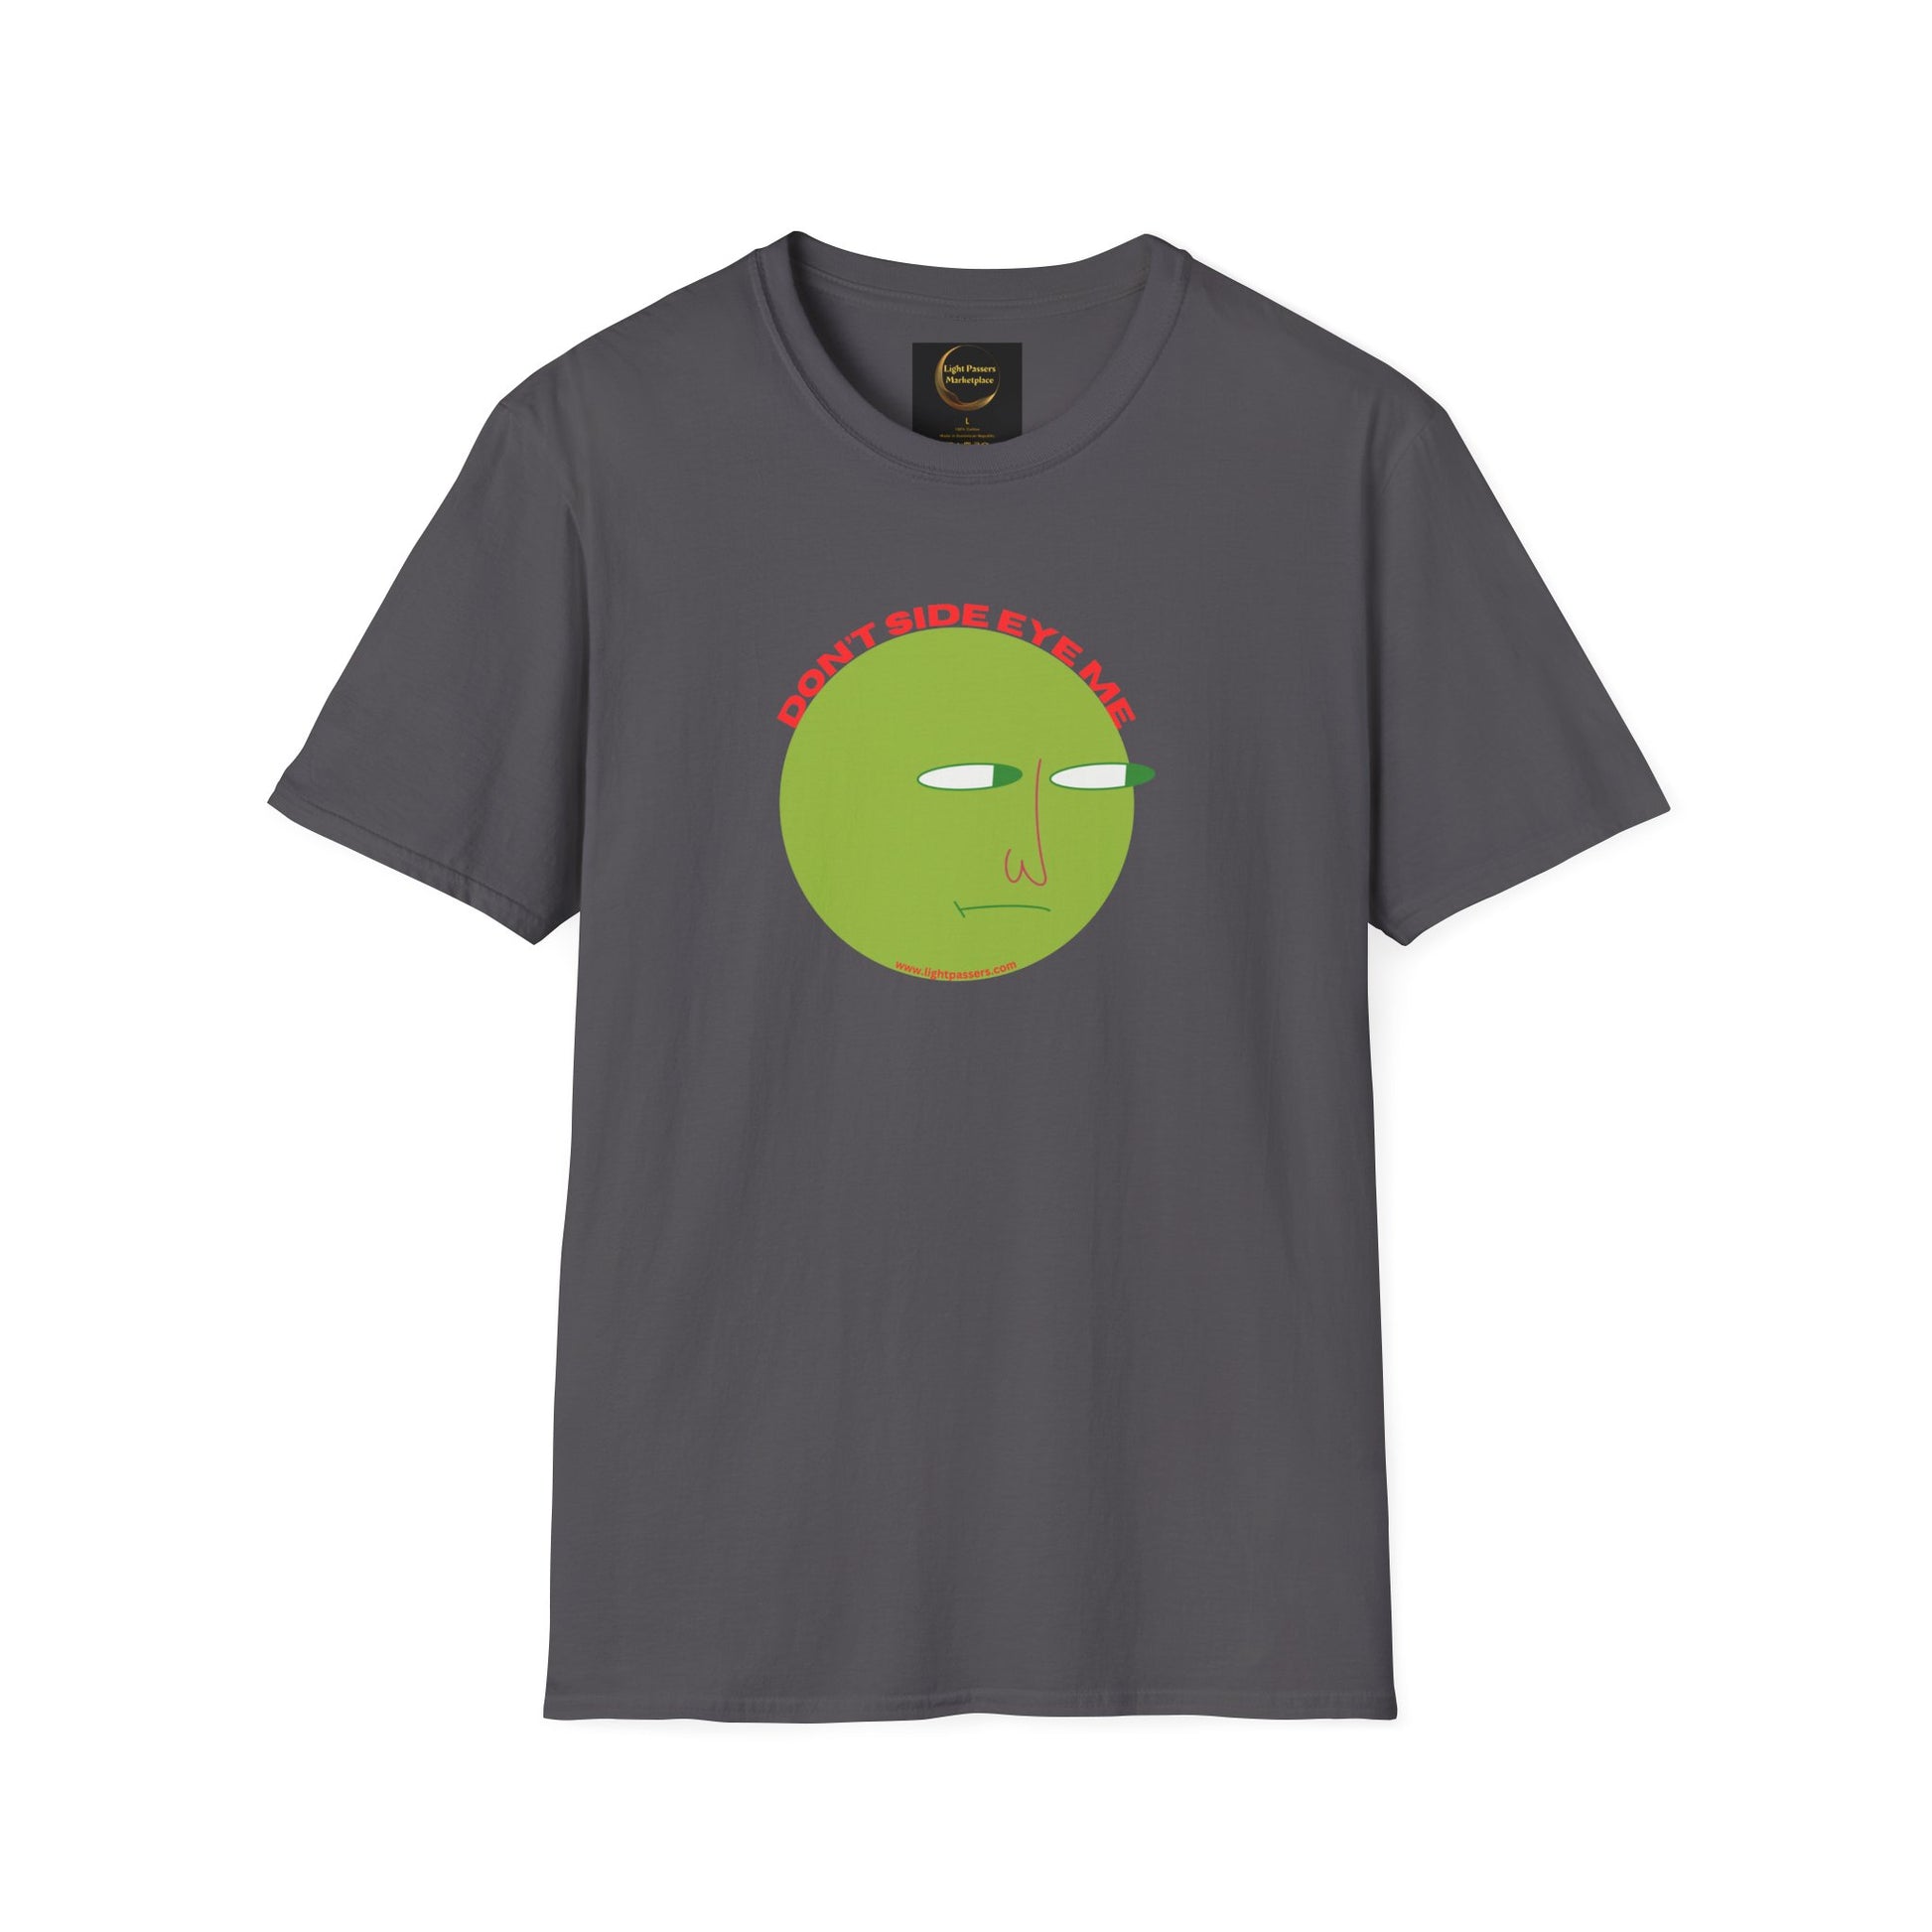 A grey unisex t-shirt featuring a green face design, made of soft 100% cotton with twill tape shoulders for durability. Classic fit with crew neckline for versatile style. Ethically produced by Gildan.